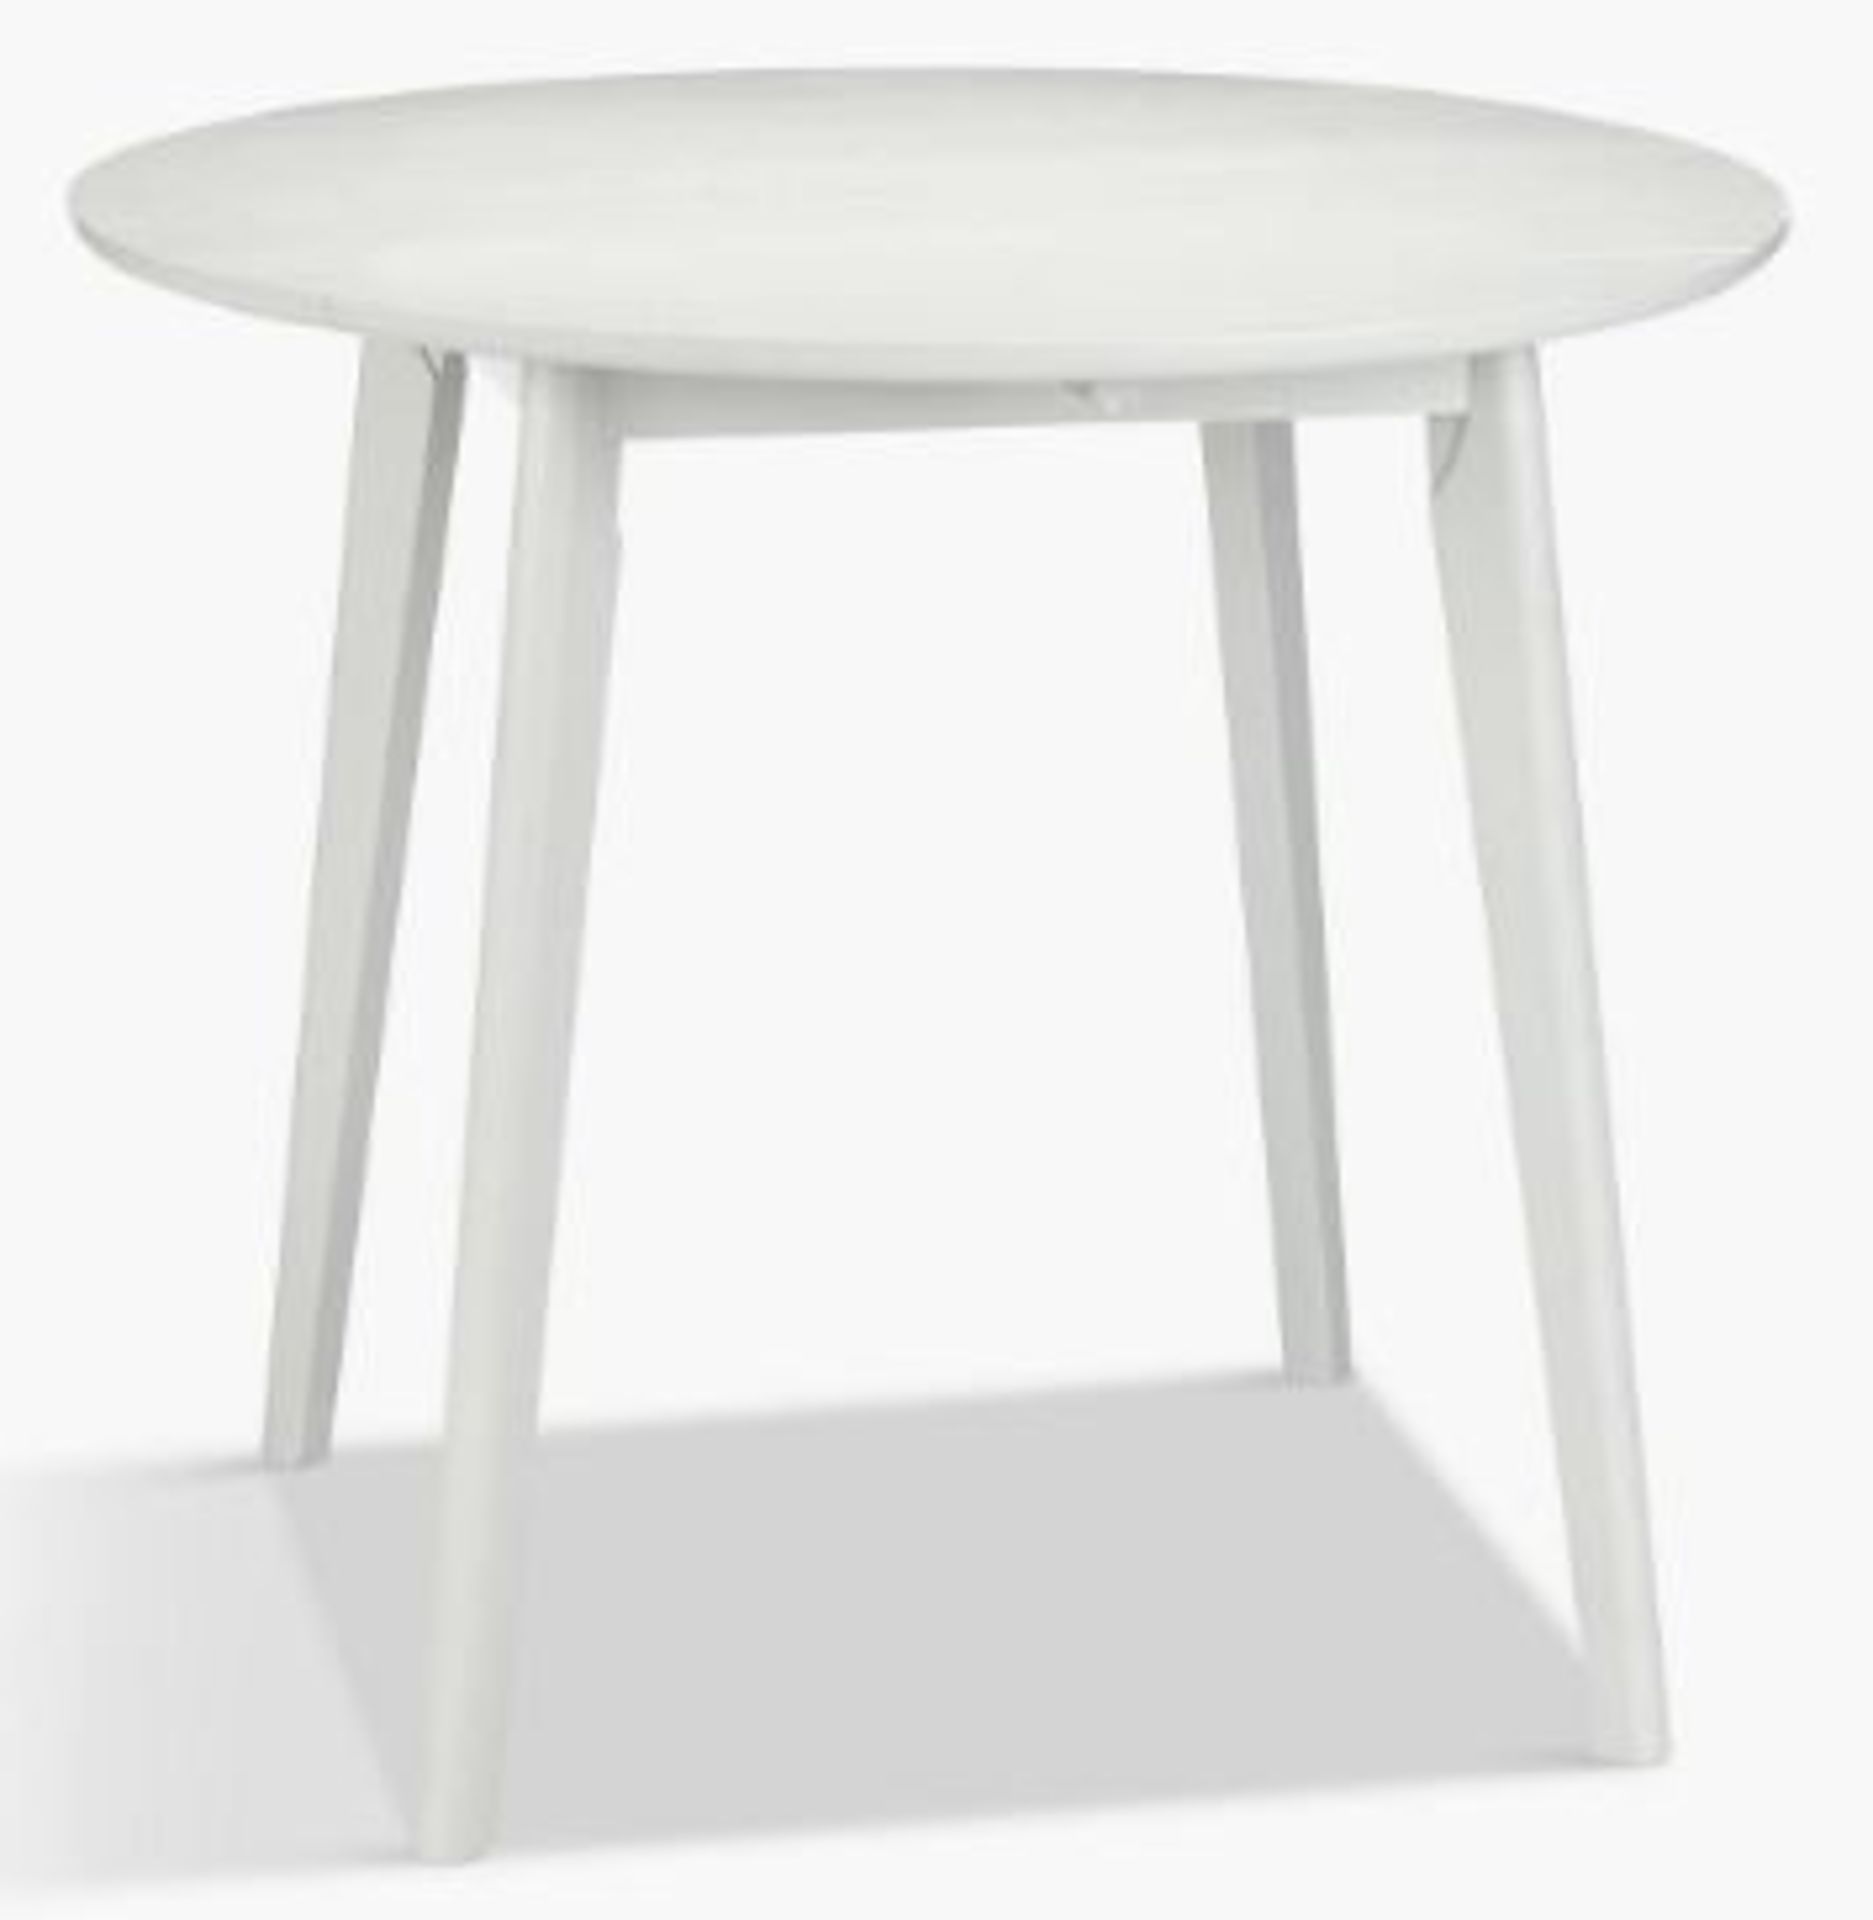 JOHN LEWIS DILLON DINING TABLE IN COOL GREY